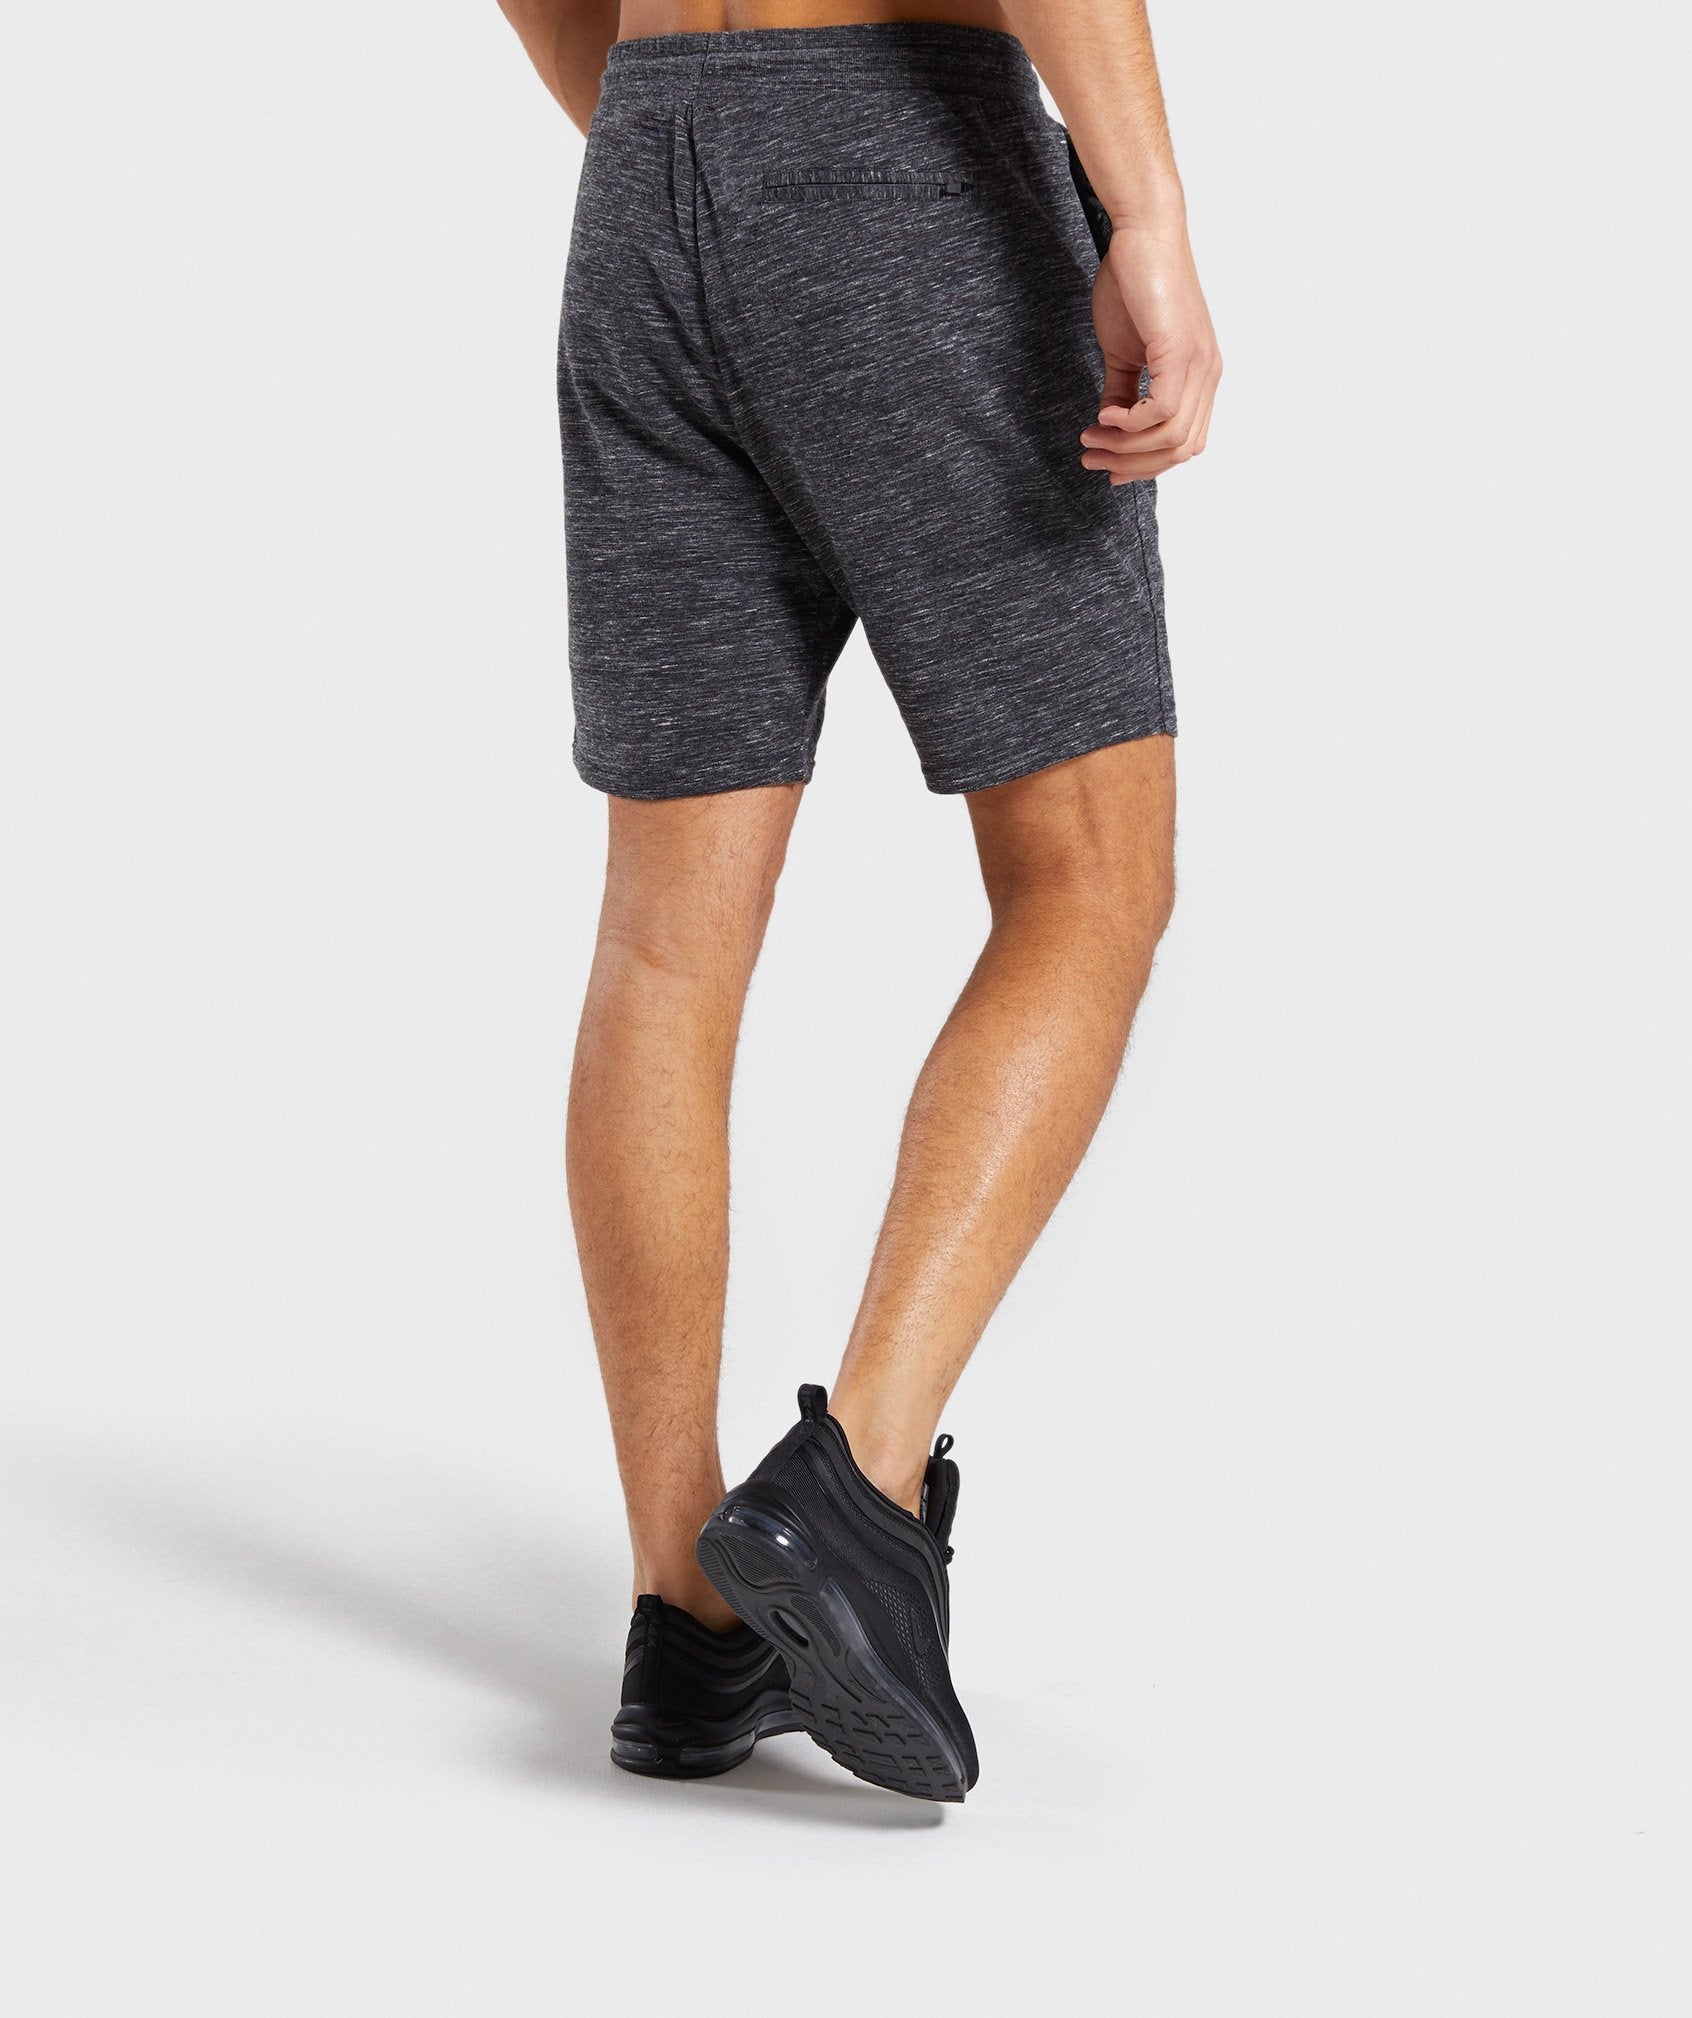 Lounge Shorts in Charcoal Marl - view 2